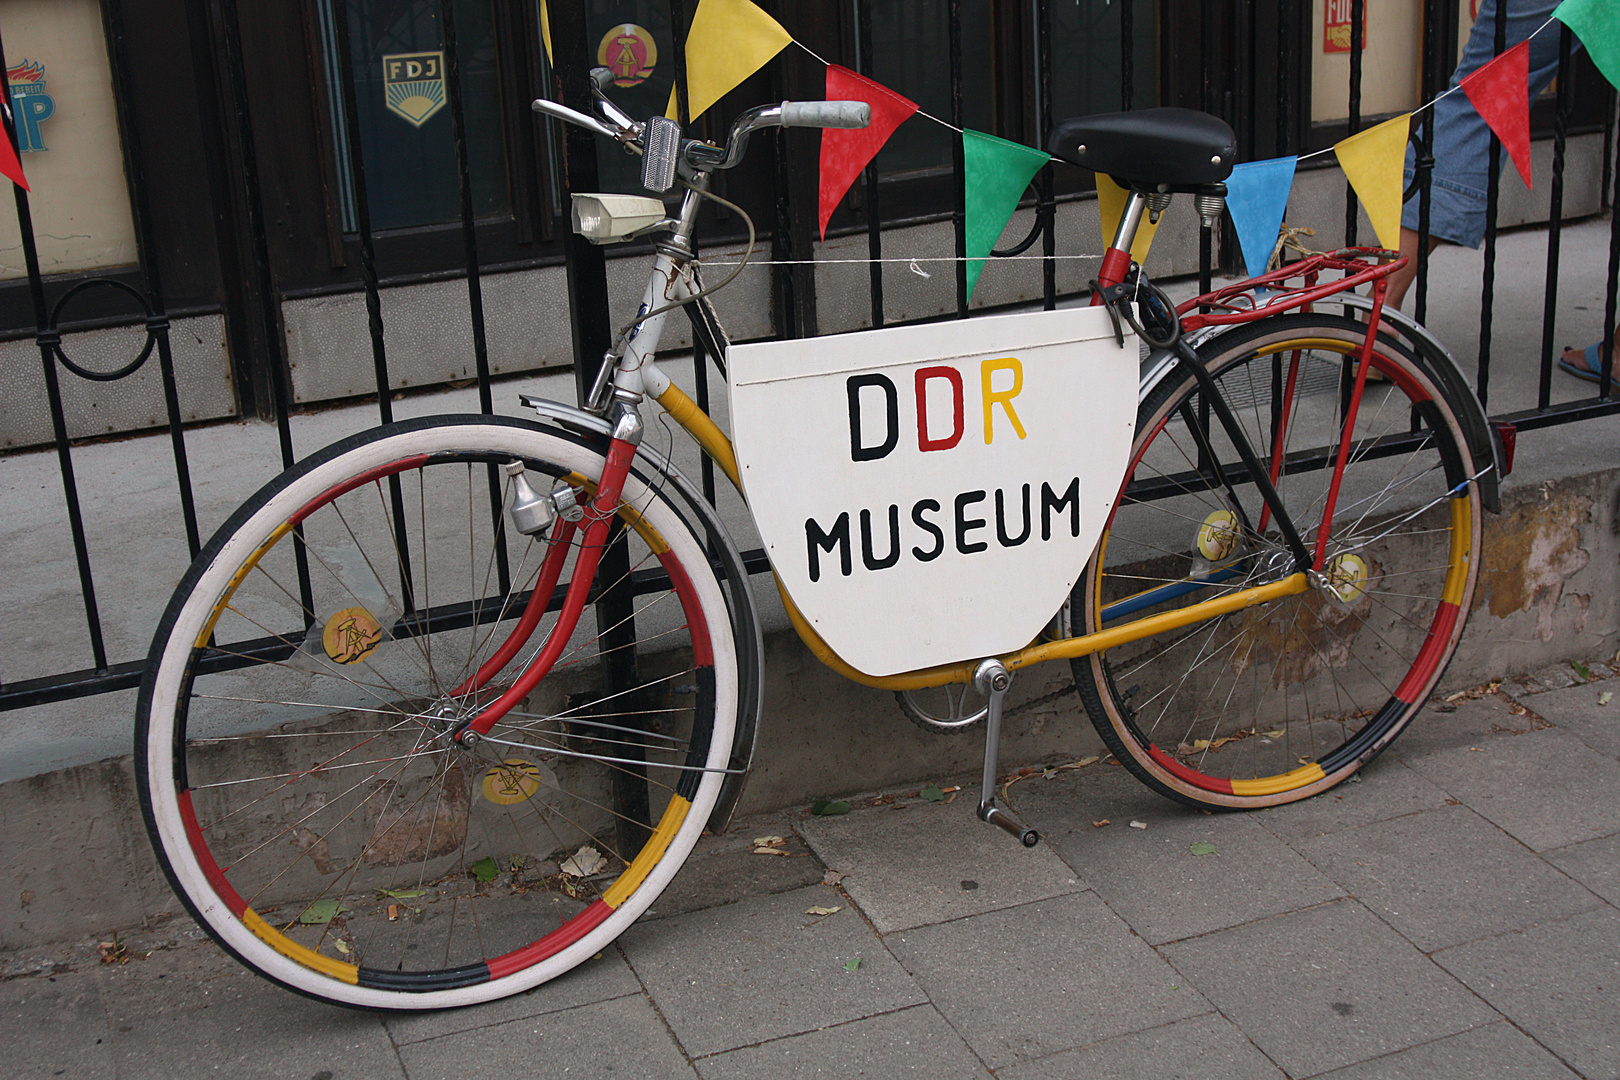 DDR Museum 1